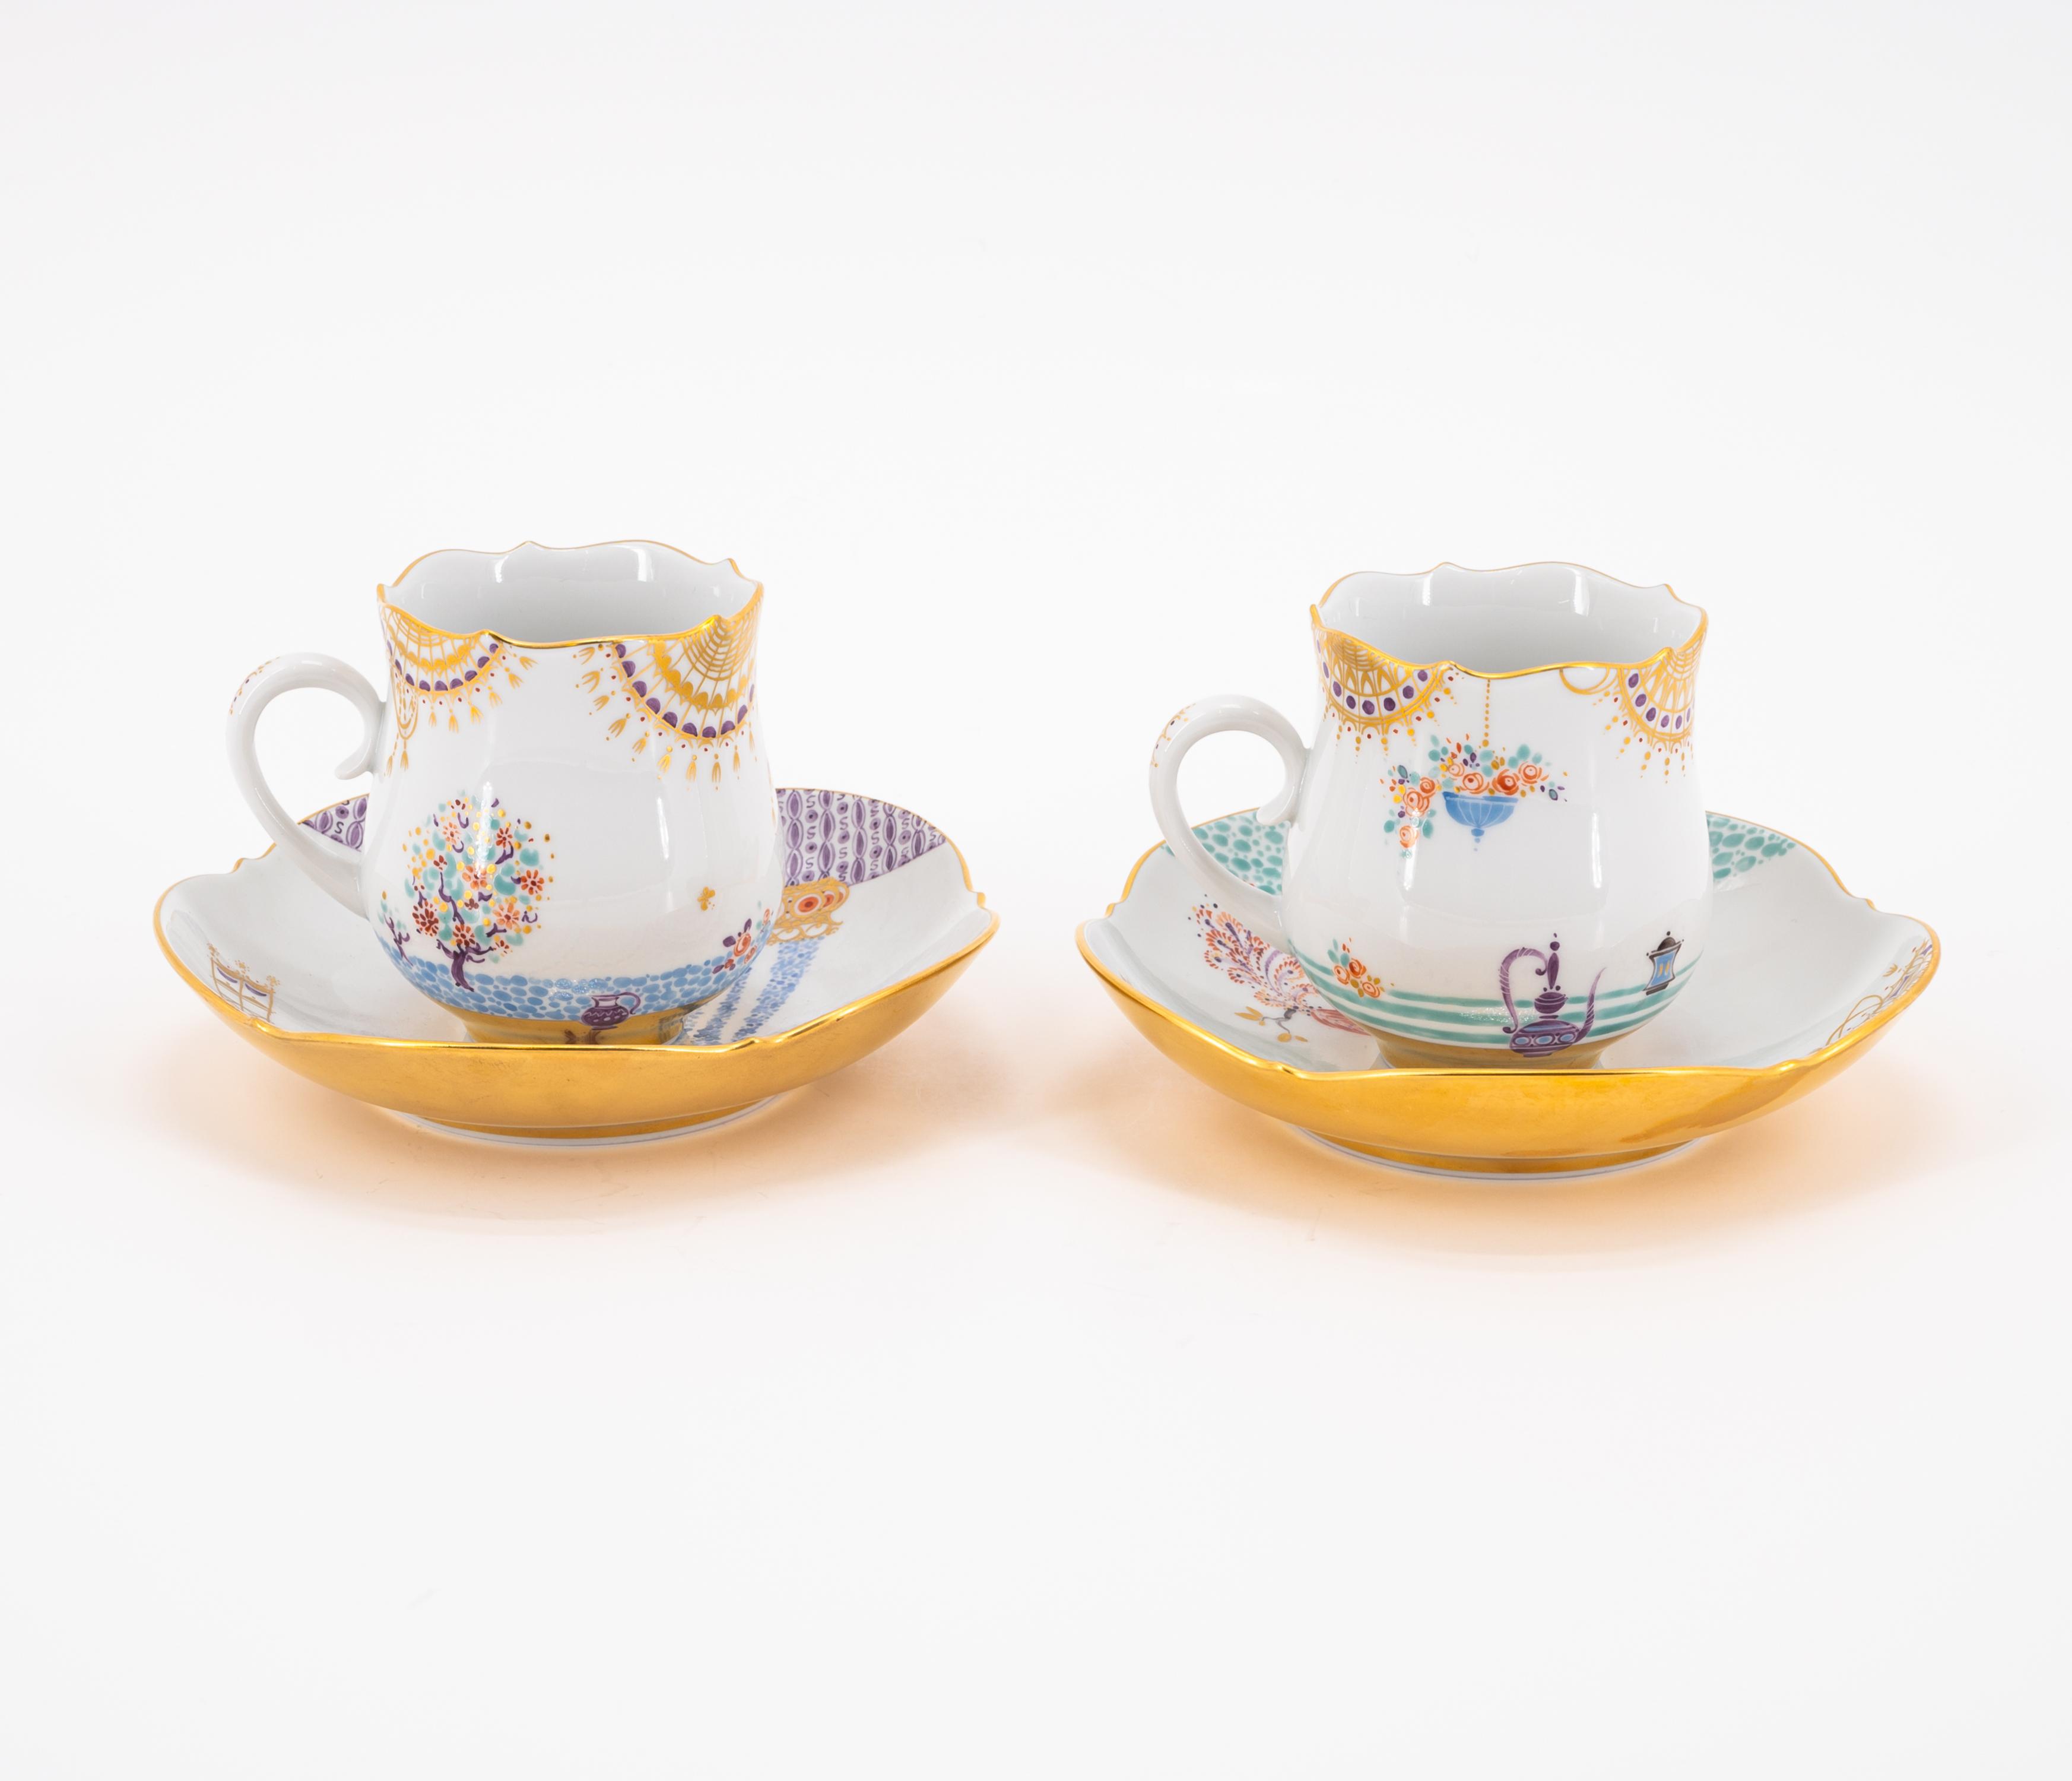 LARGE PORCELAIN COFFEE SERVICE WITH '1001 NIGHTS' DECOR FOR 12 PEOPLE - Image 9 of 19